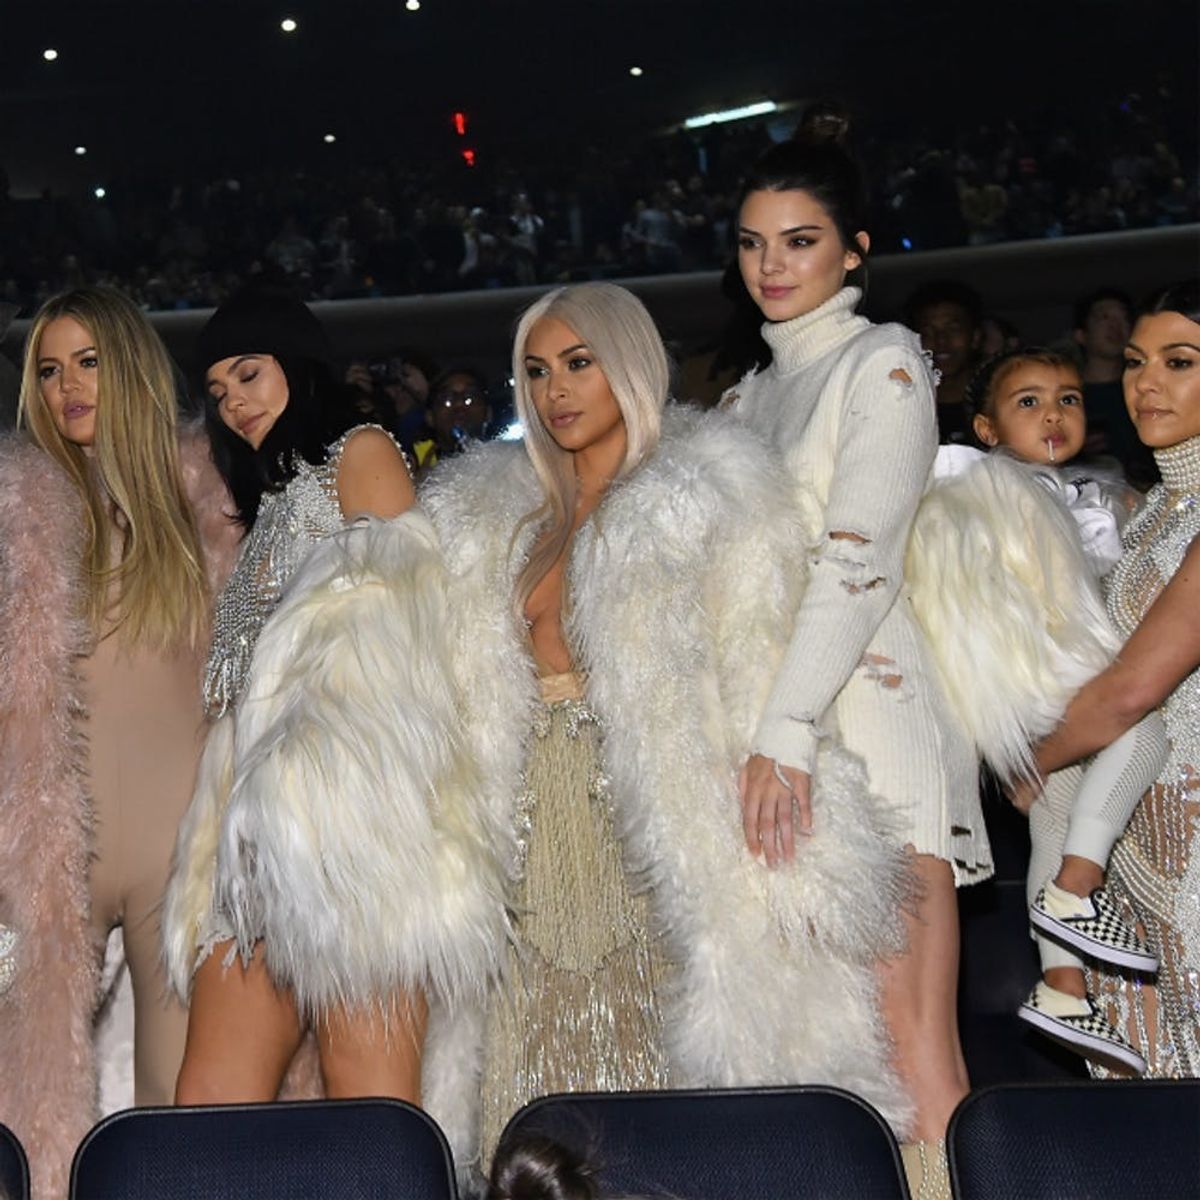 Kim Kardashian West and Kanye West Will Compete Against the KarJenners on ‘Family Feud’